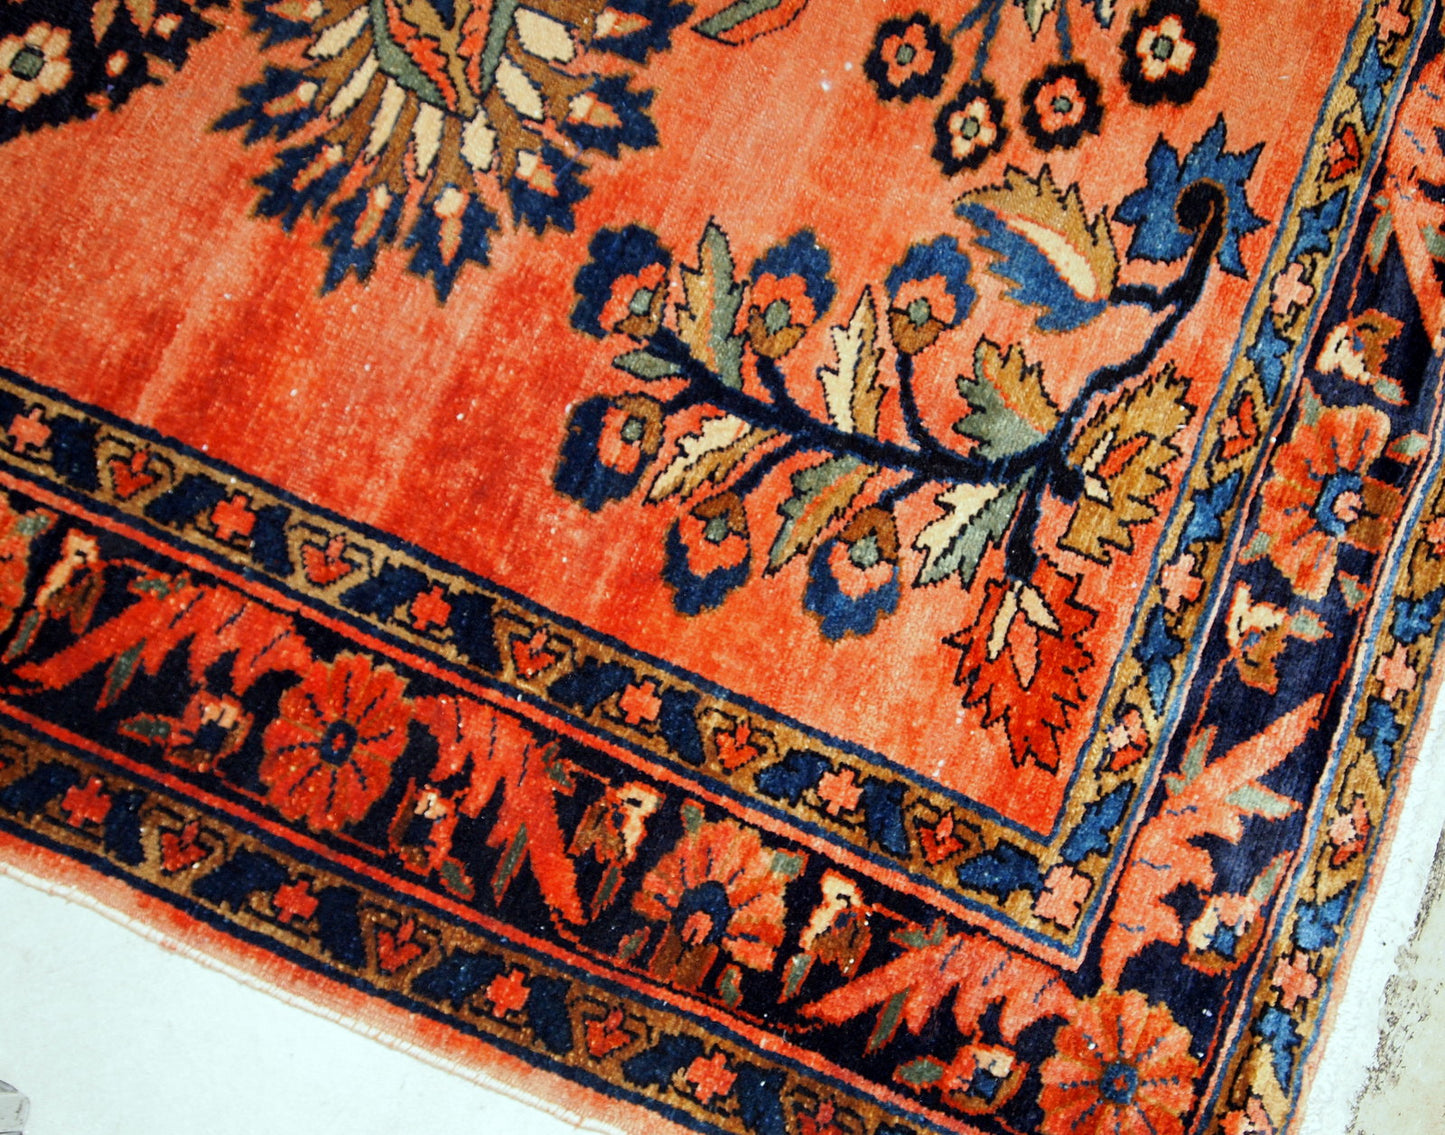 Antique hand-woven Lilihan rug in navy blue, white and red  colors. This rug is from the beginning of 20th century in original good condition.